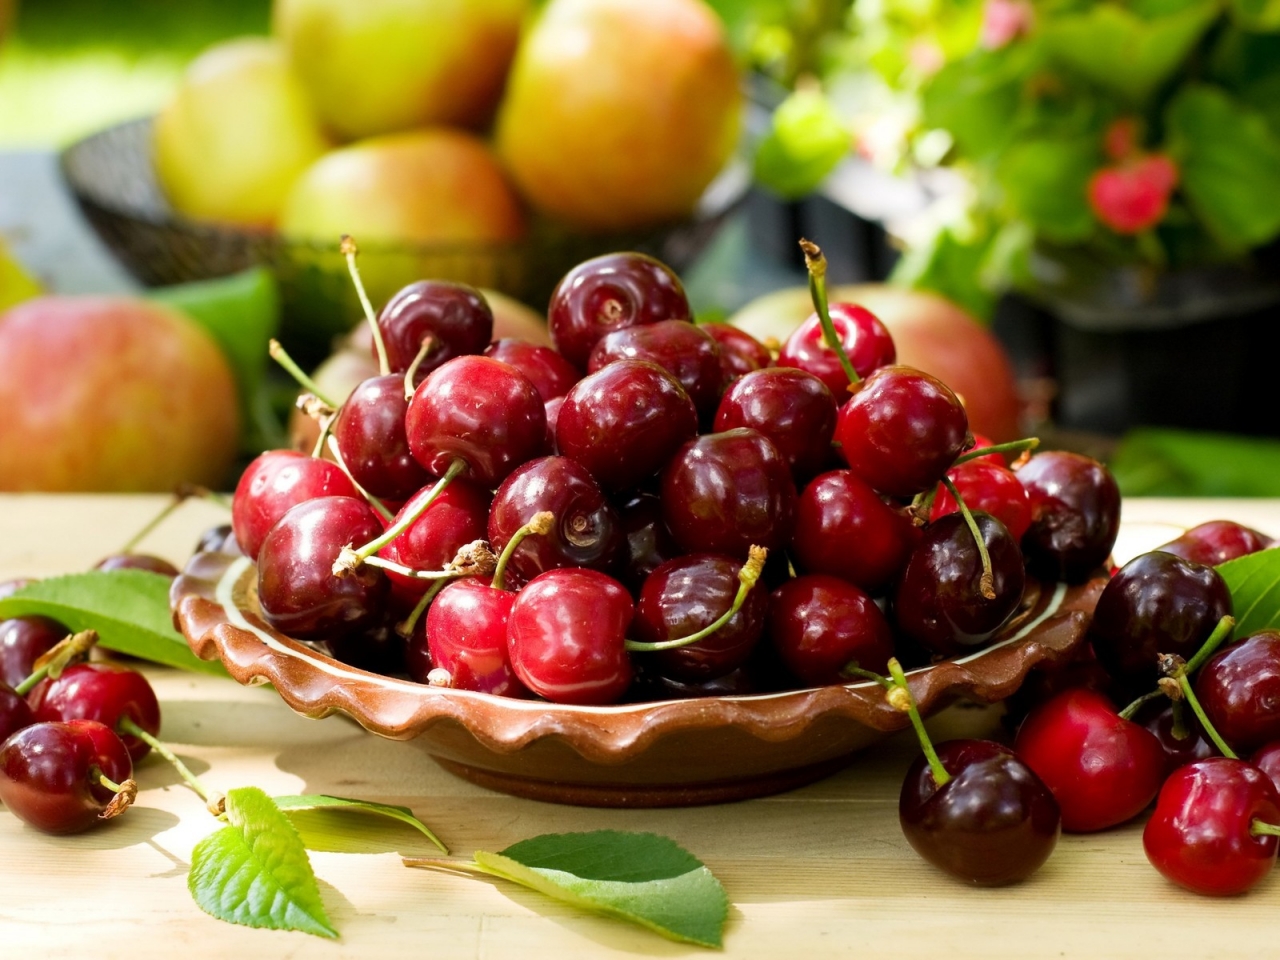 Bowl of Cherries for 1280 x 960 resolution